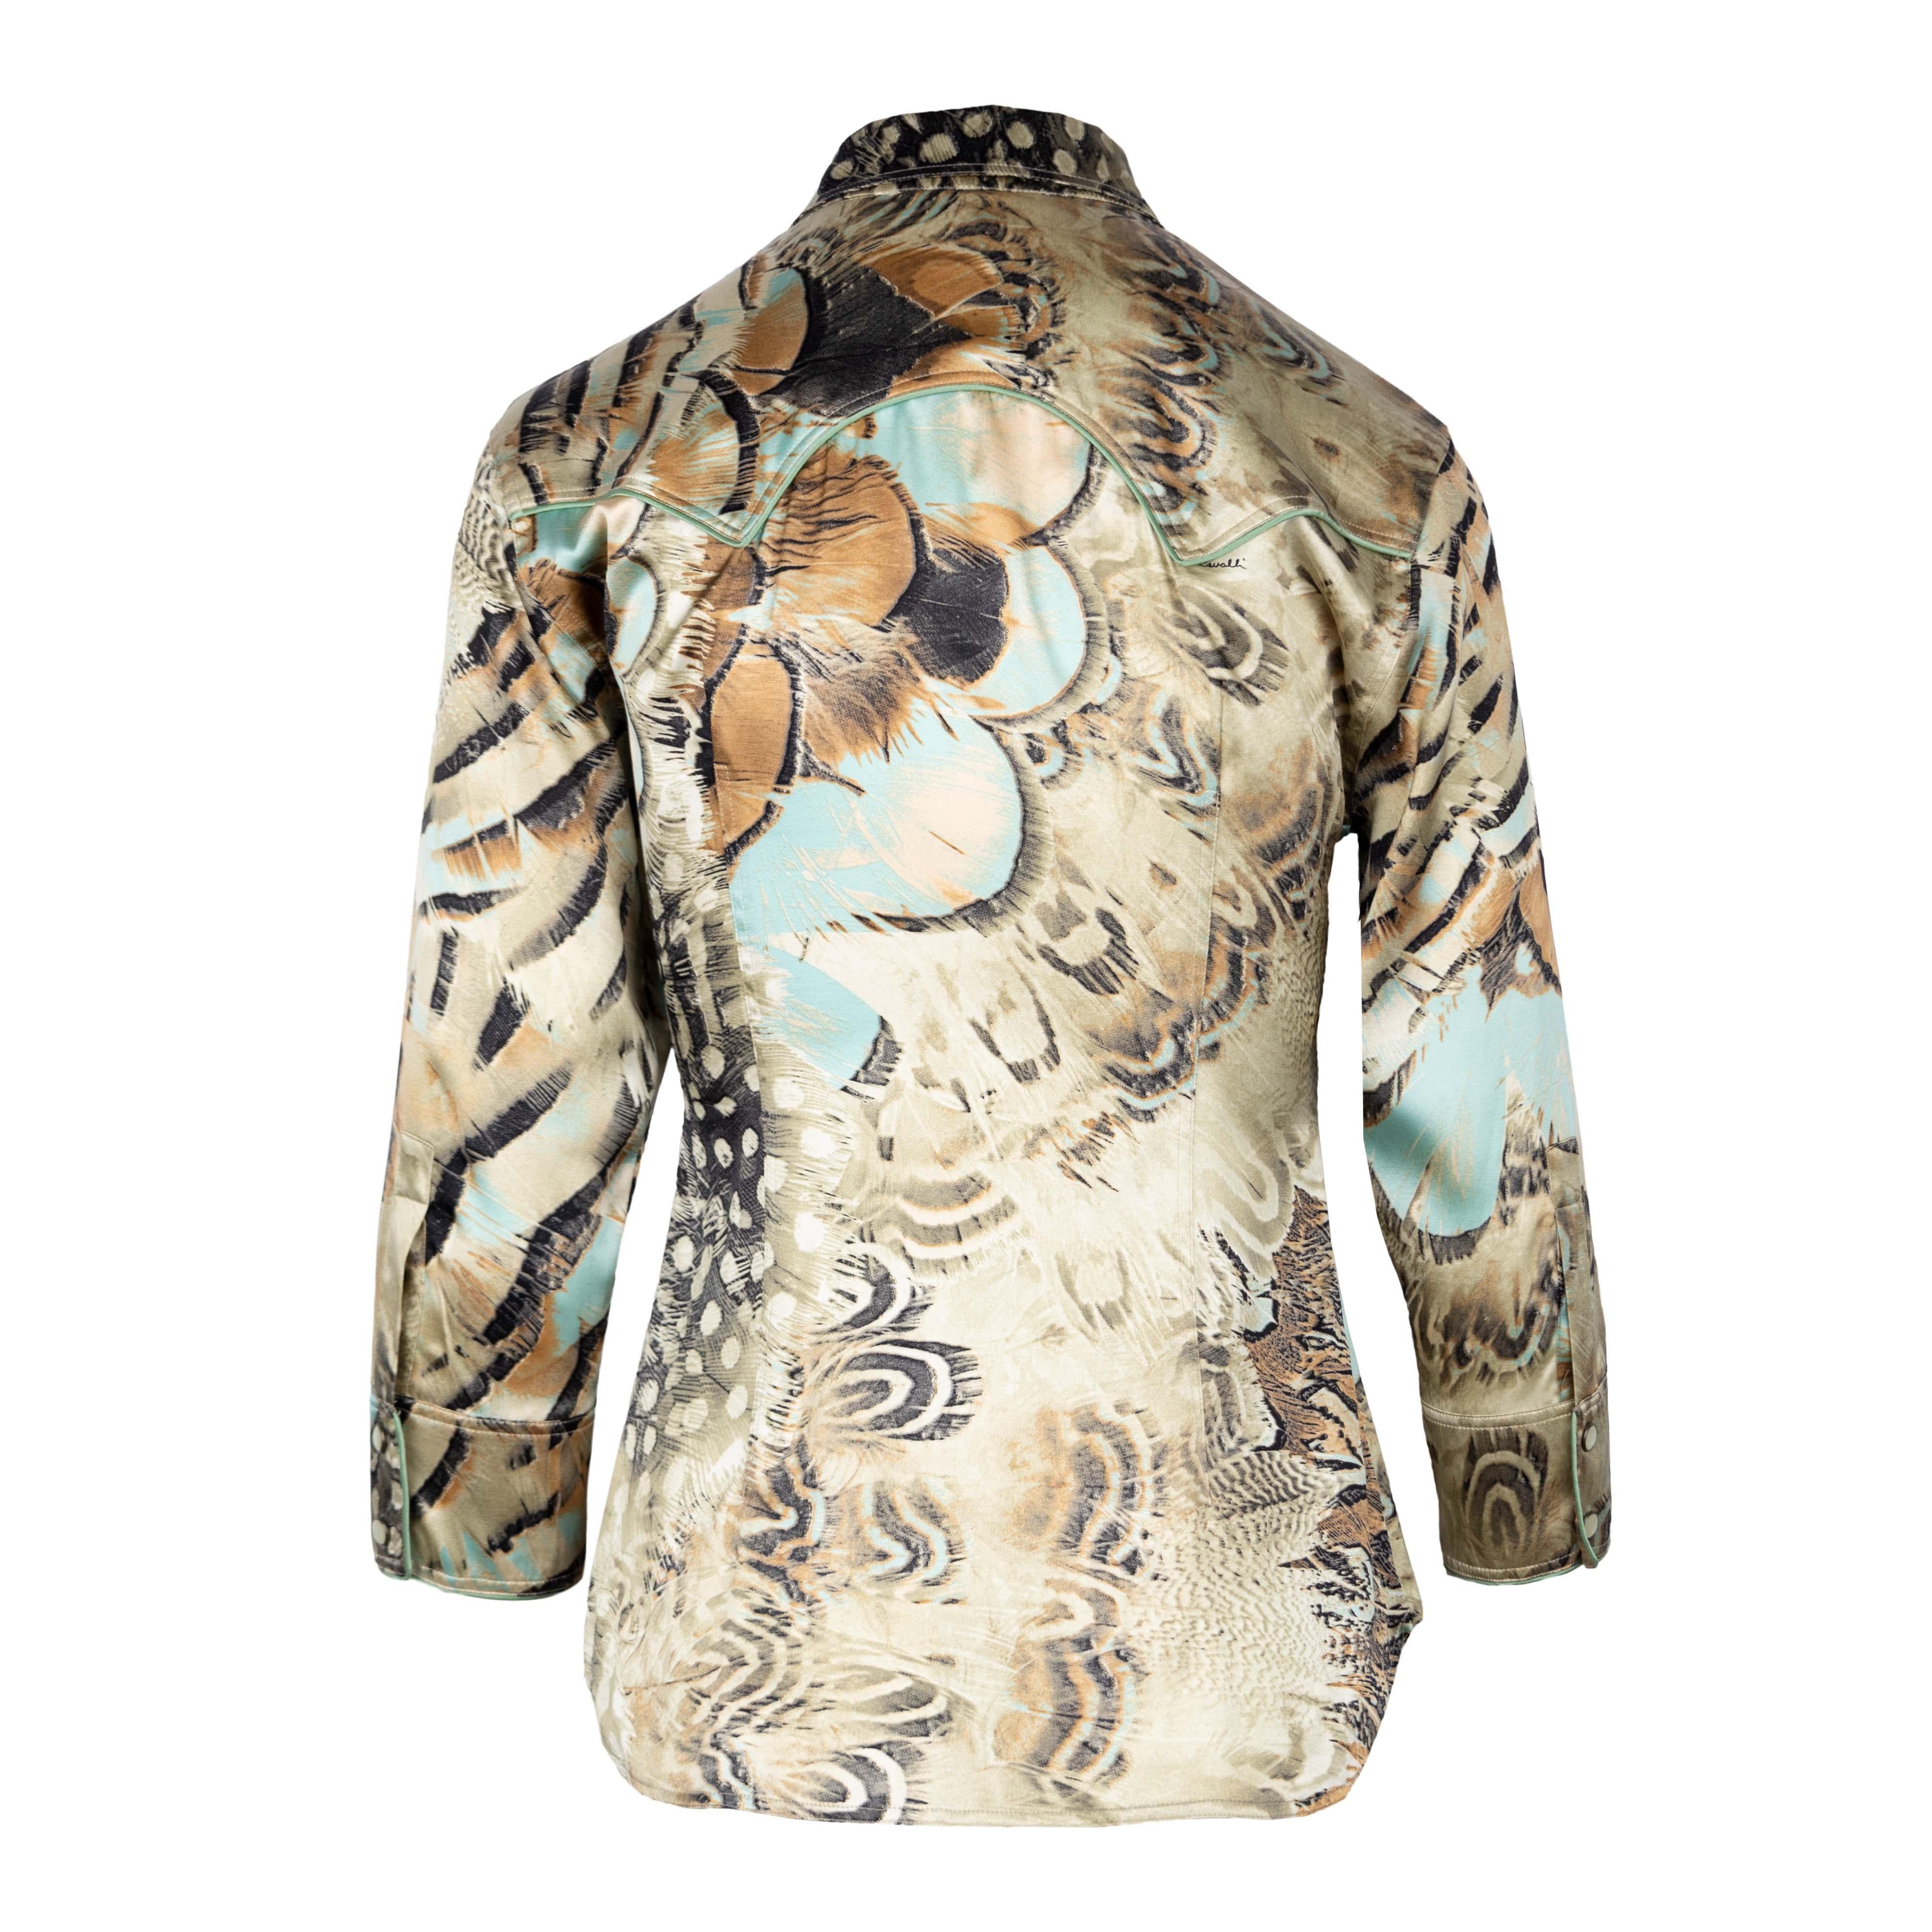 Roberto Cavalli cowboy shirt styled silk blouse with teal contrast piping on the two front pockets, button stand and cuff of the sleeves. The multi colored feather print was featured on the summer spring 2004 collection. The top has three-quarter